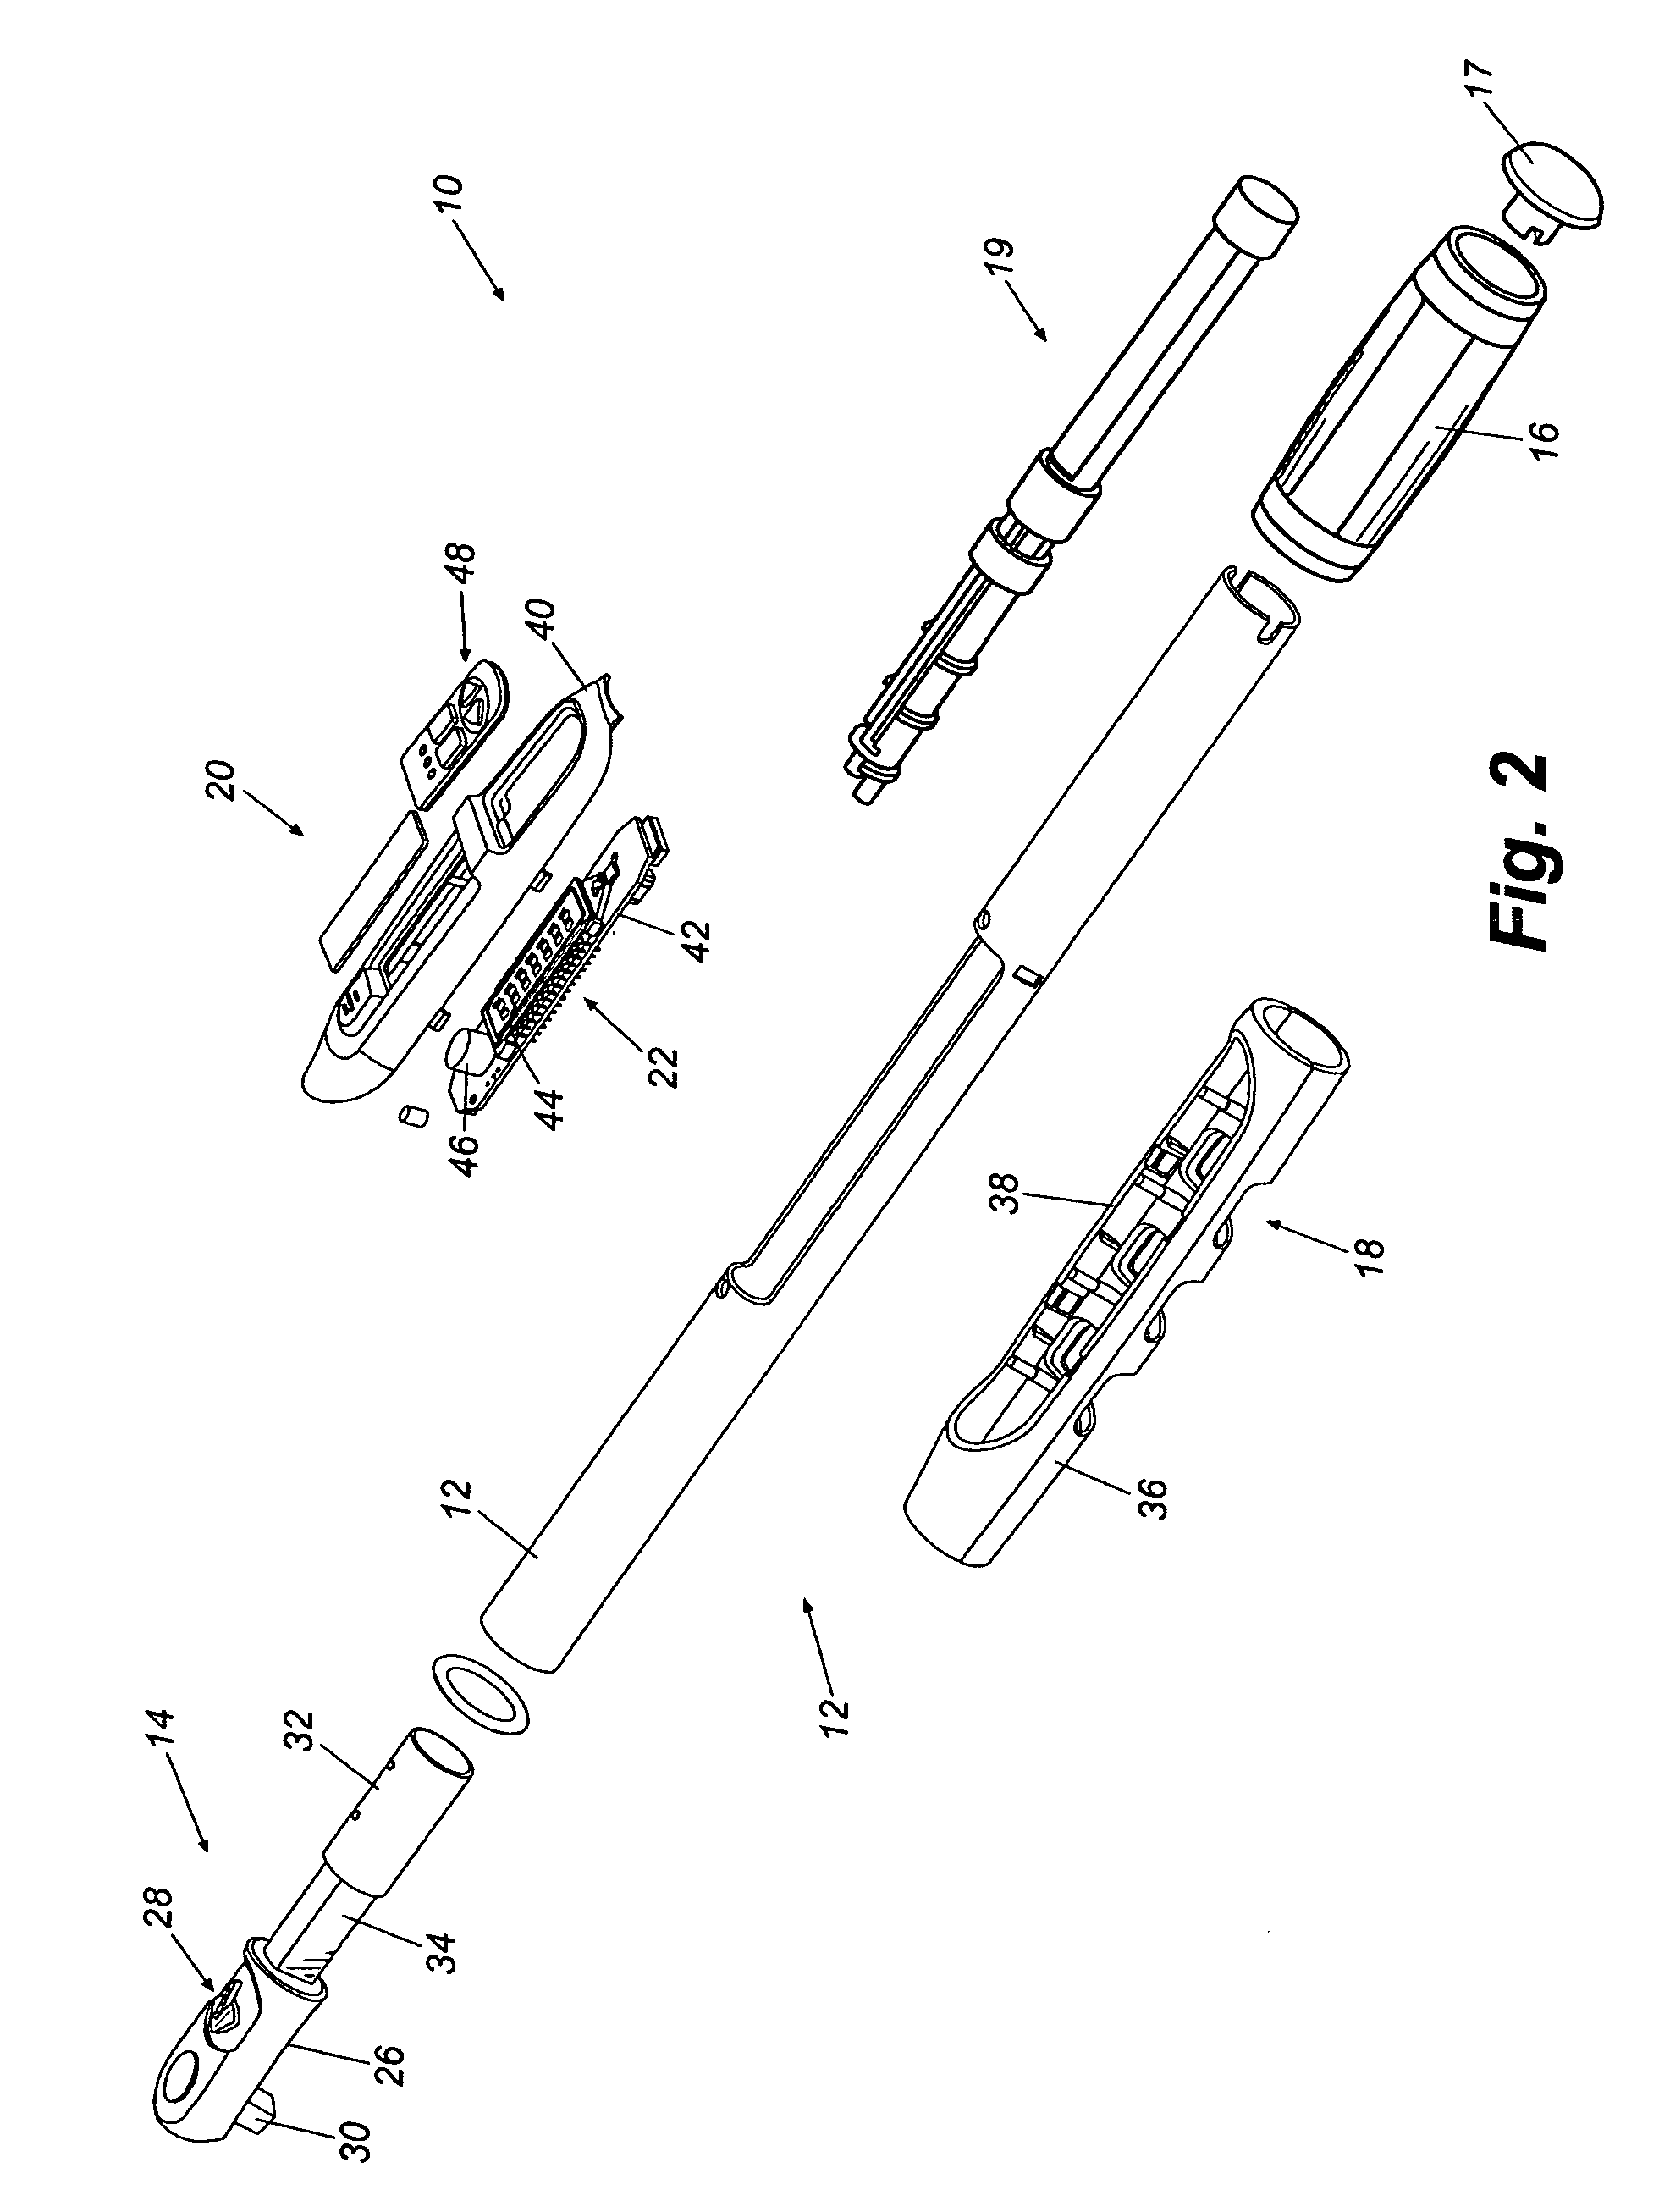 Display device for an electronic torque wrench